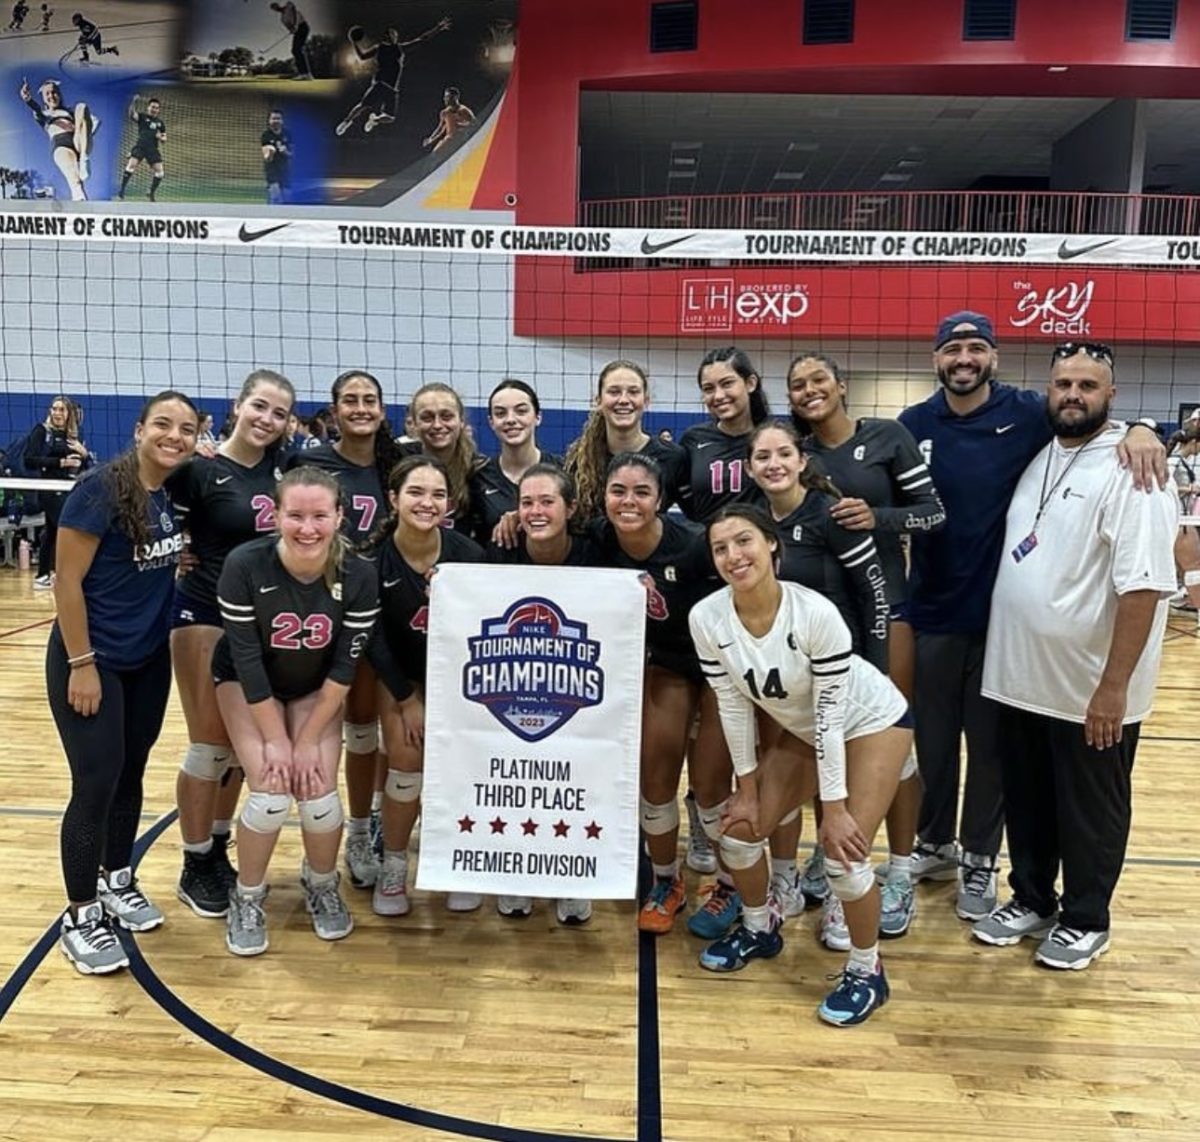 Girls Varsity Volleyball celebrating after placing 3rd in the Nike Tournament of Champions Premier Division. The group only lost once throughout the tournament and solidified themselves as a top highschool team in the nation. Photo provided by @gullivergirlsvolleyball